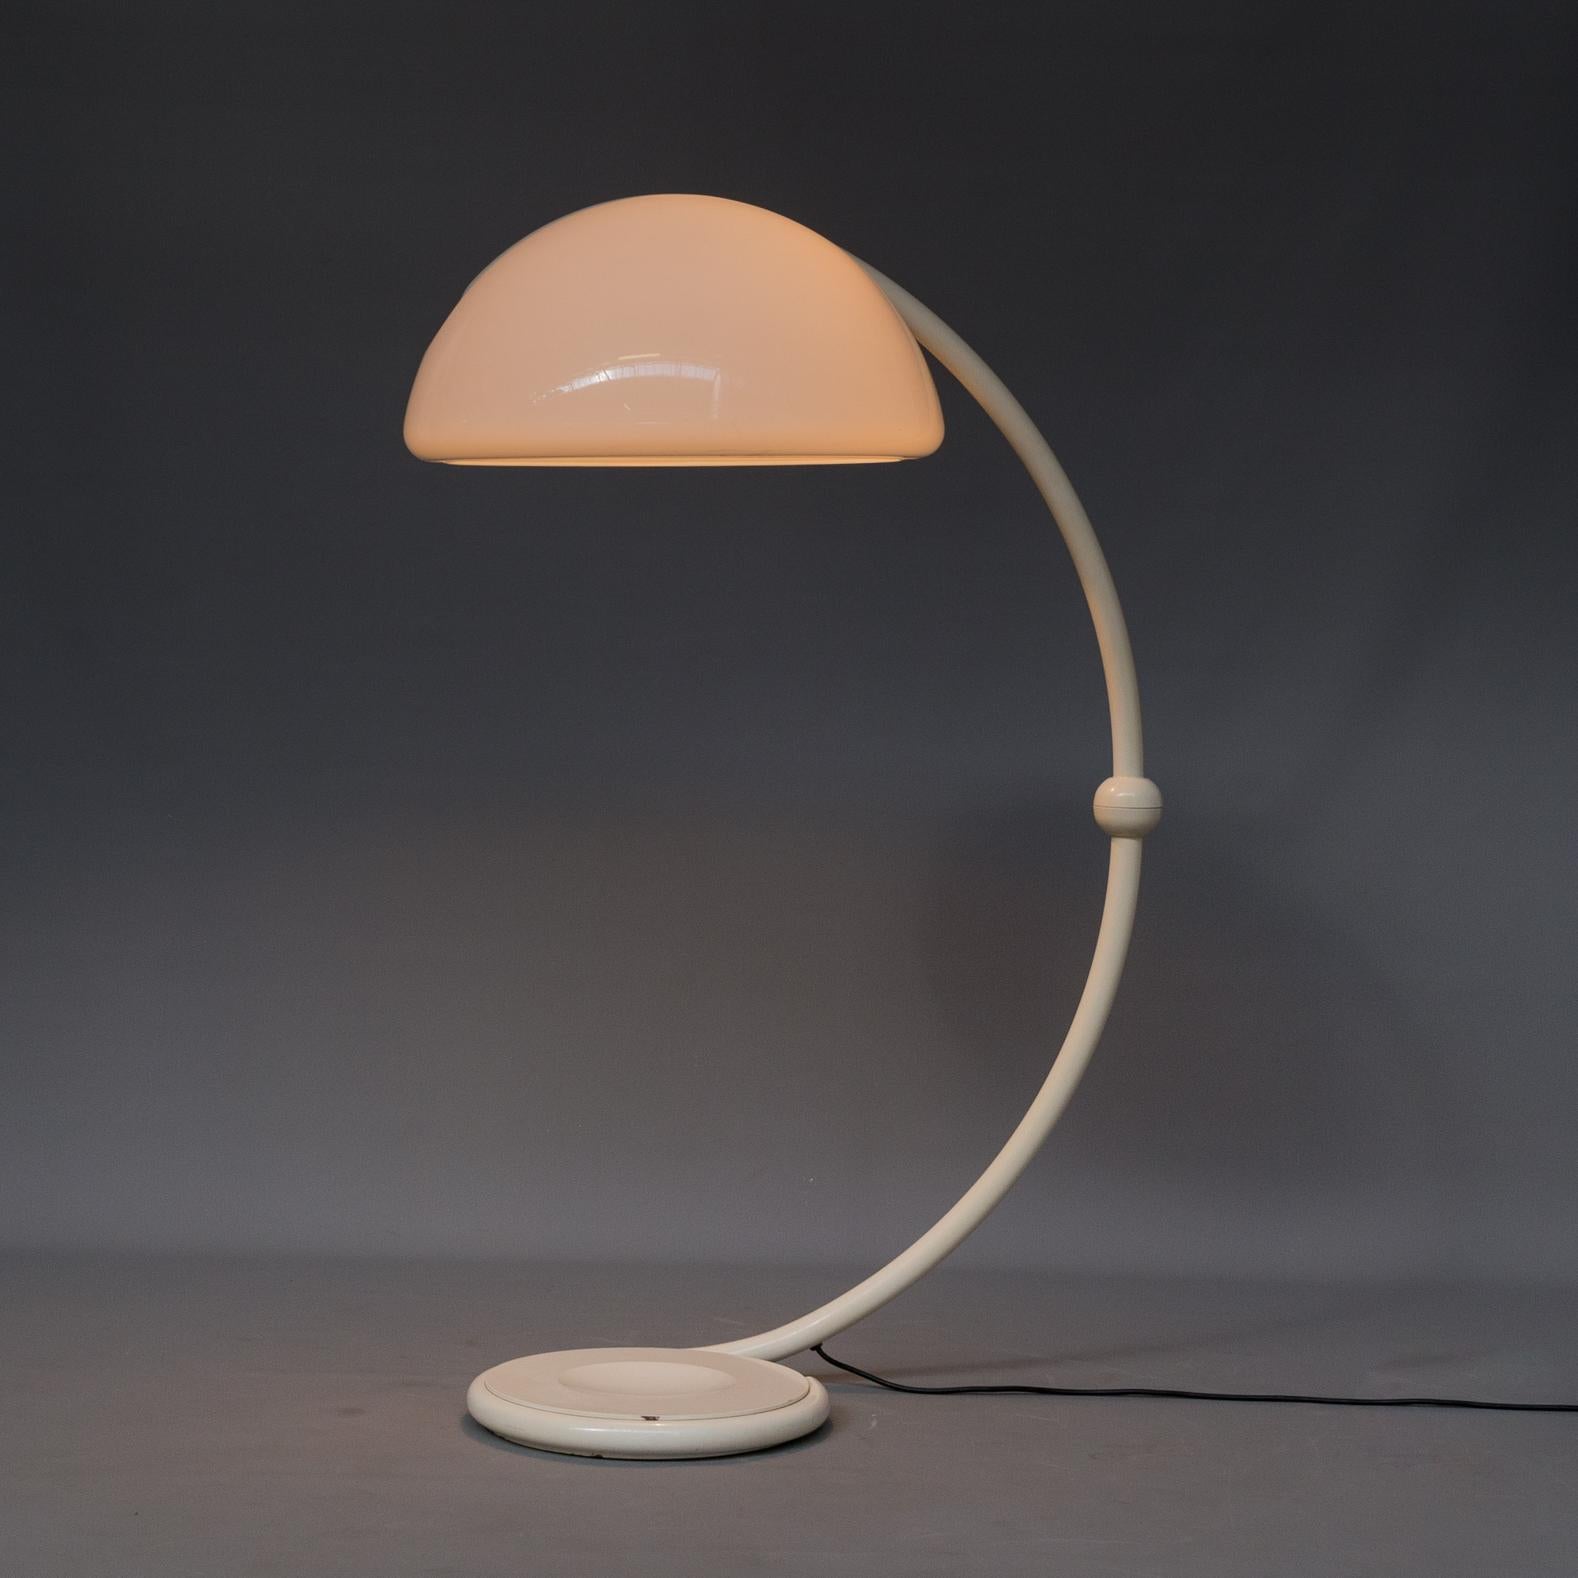 Elio Martinelli “Serpente” floorlamp for Martinelli Luce Italy. The top half of this lamp pivots 360 degrees creating a different look each time. The floorlamp is that flexible in the upper half that its design shows very different design looks and